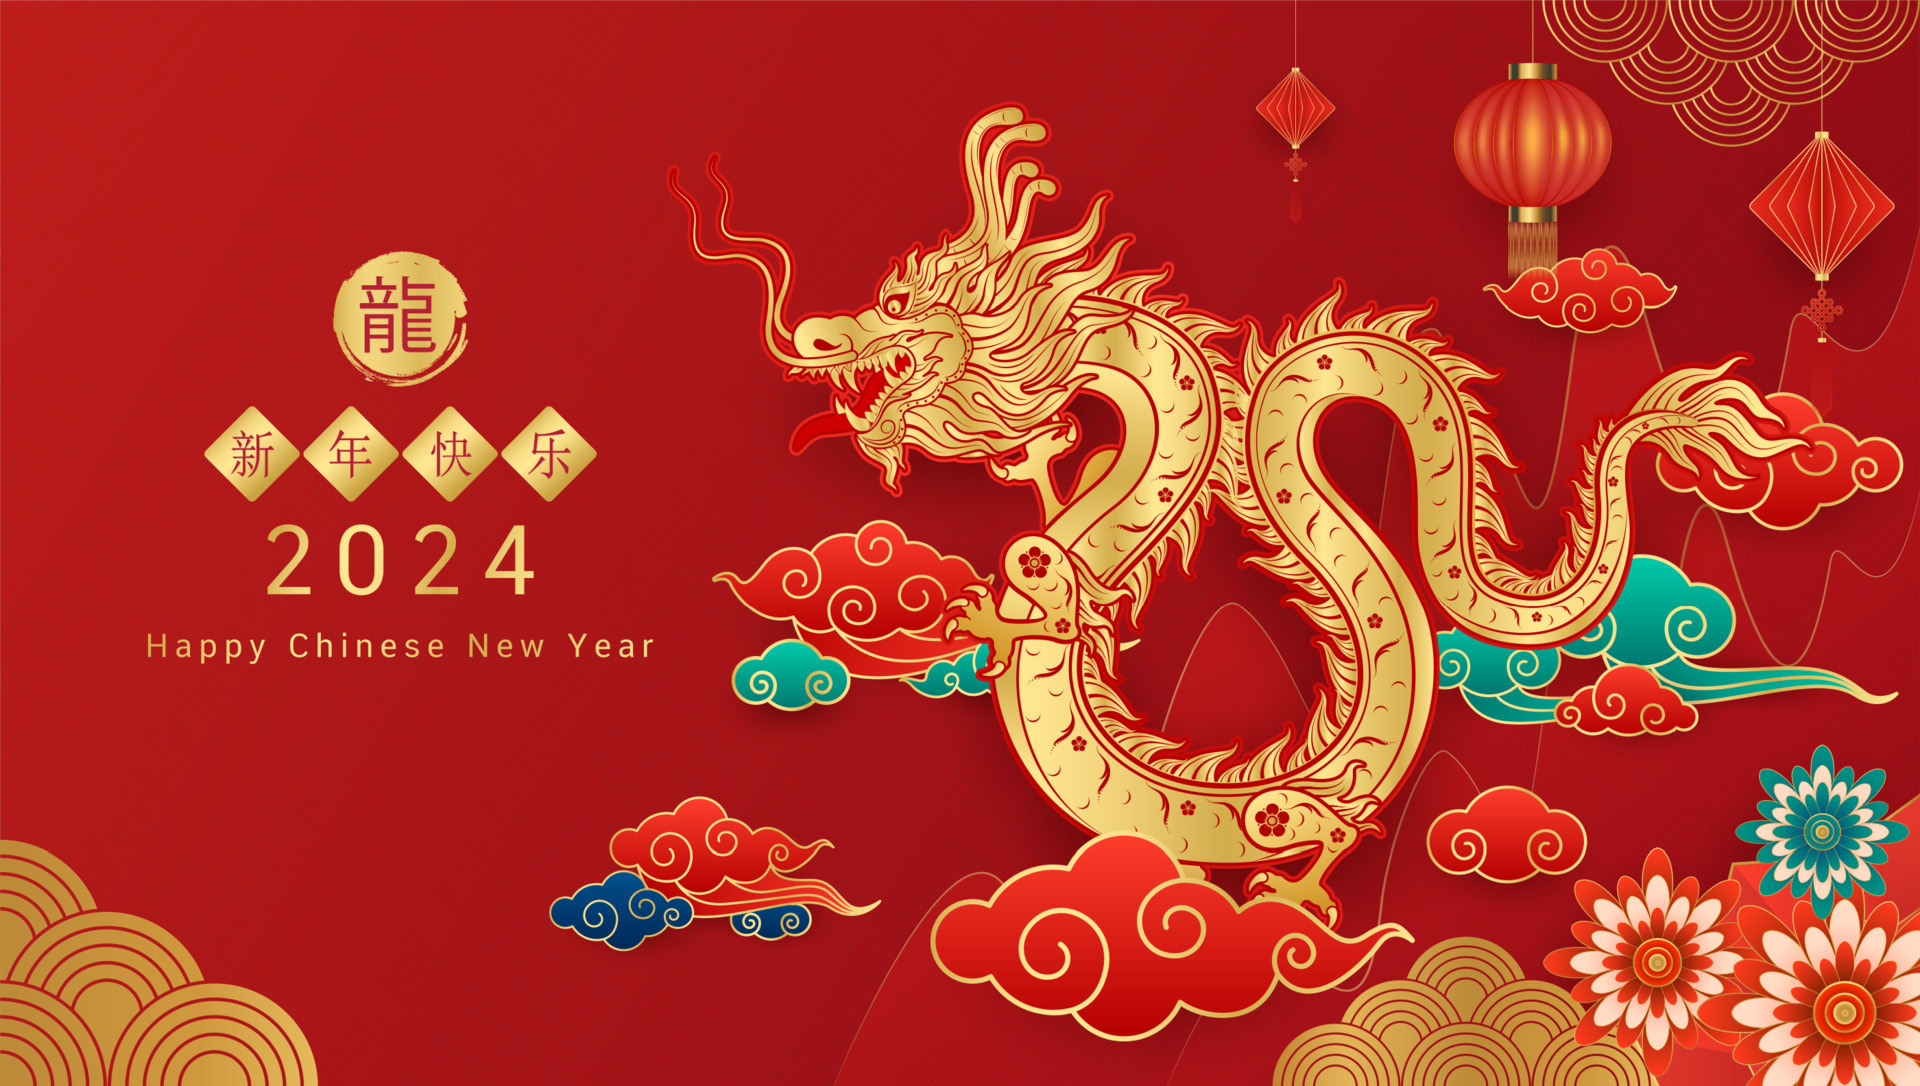 2024 Chinese New Year holiday notice